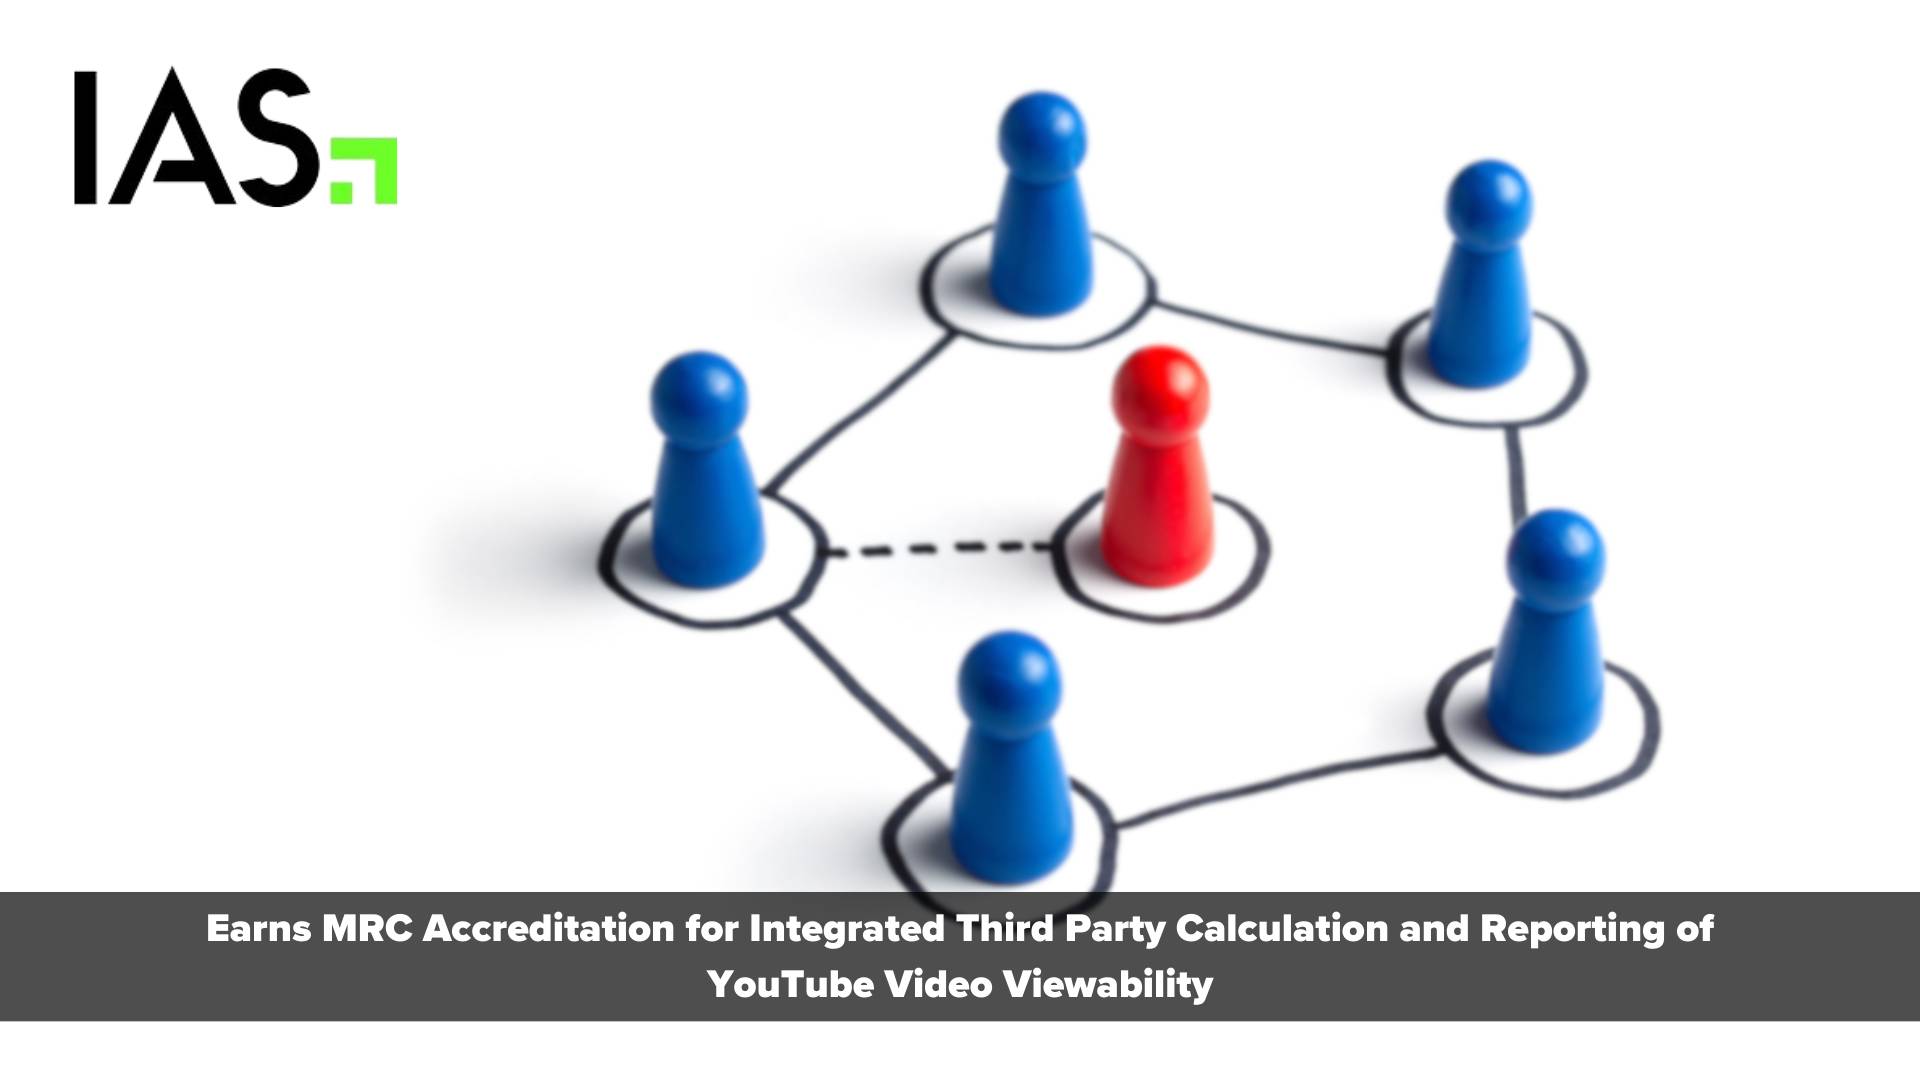 INTEGRAL AD SCIENCE EARNS MRC ACCREDITATION FOR INTEGRATED THIRD PARTY CALCULATION AND REPORTING OF YOUTUBE VIDEO VIEWABILITY